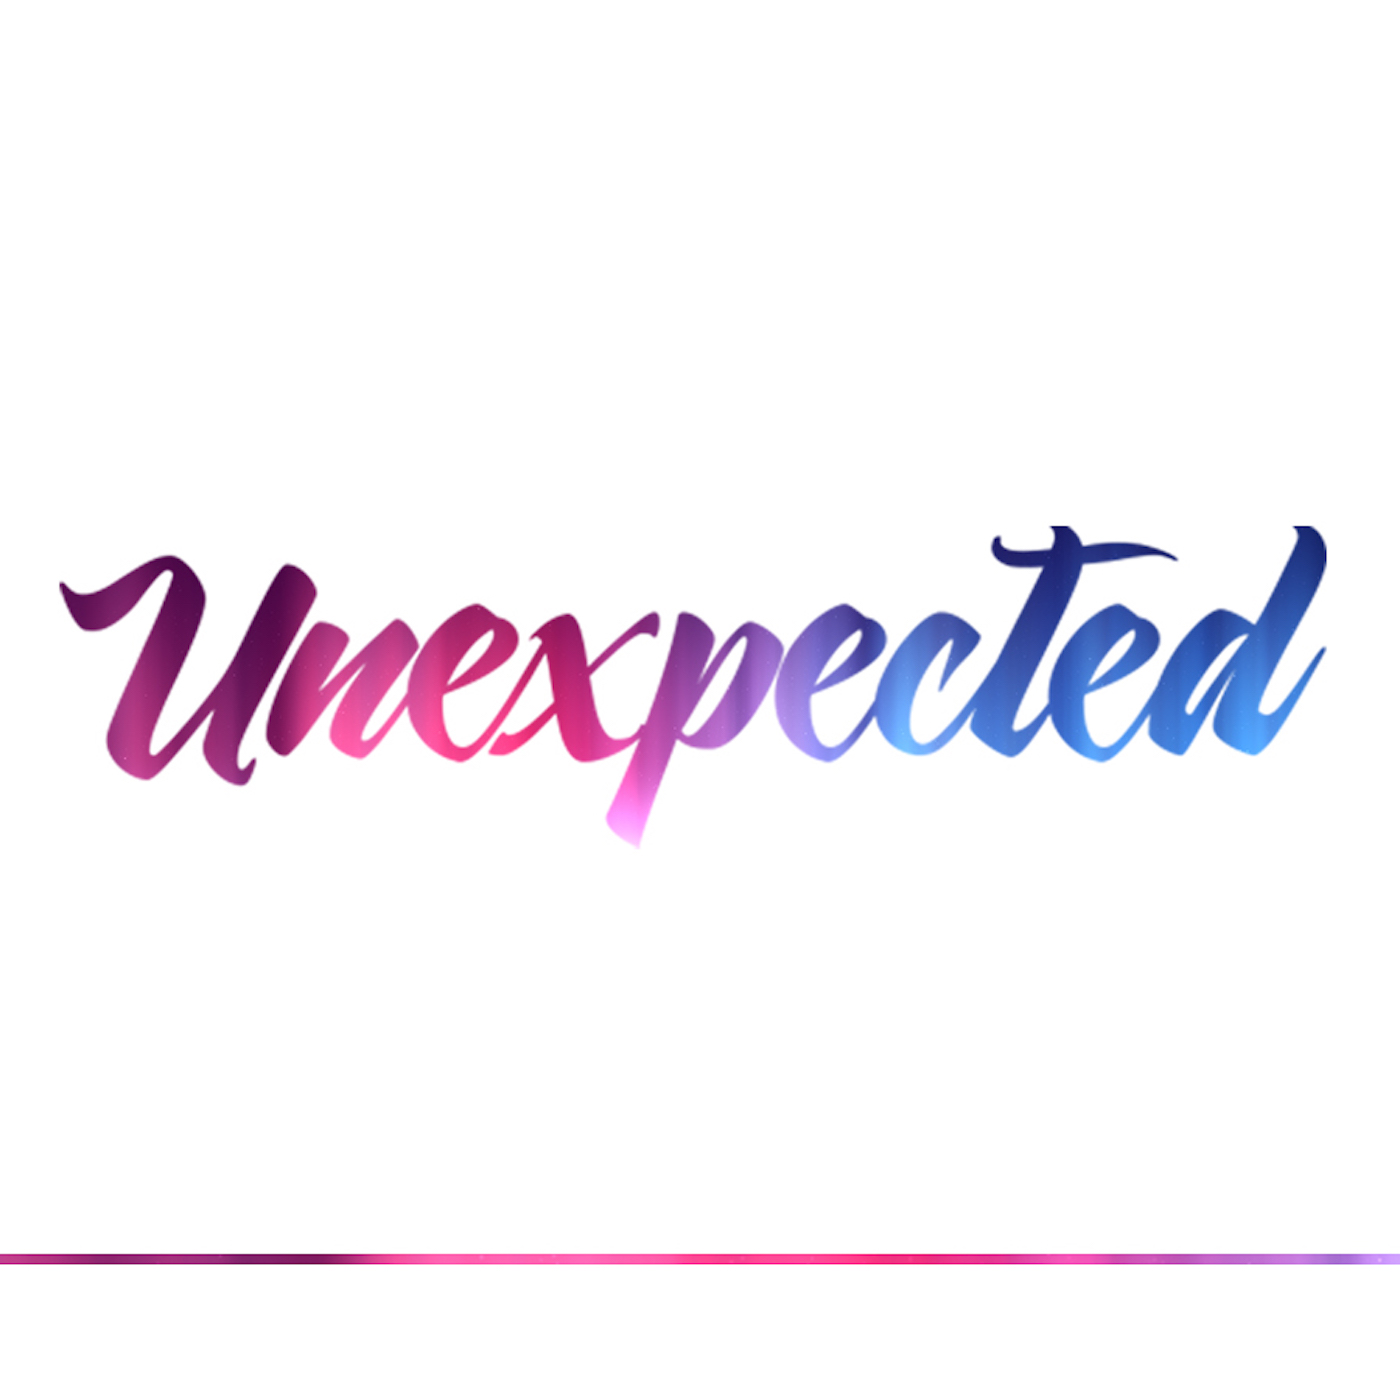 Unexpected - Week 9